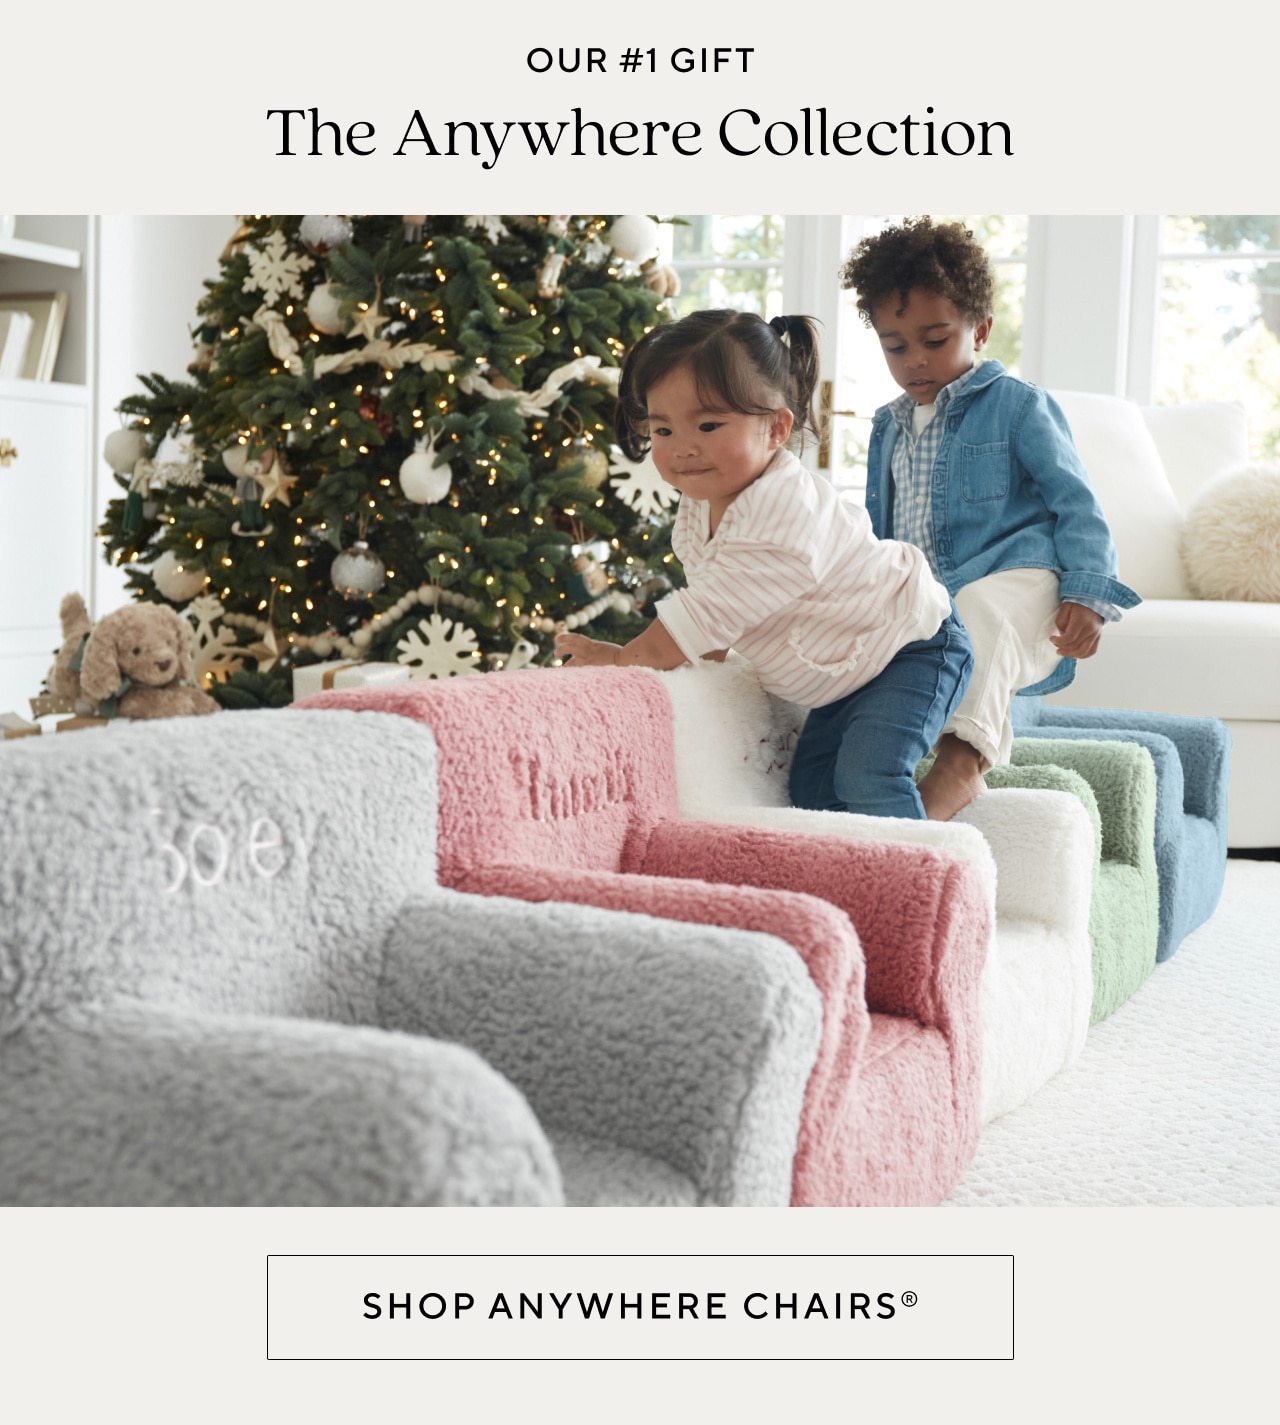 SHOP ANYWHERE CHAIRS